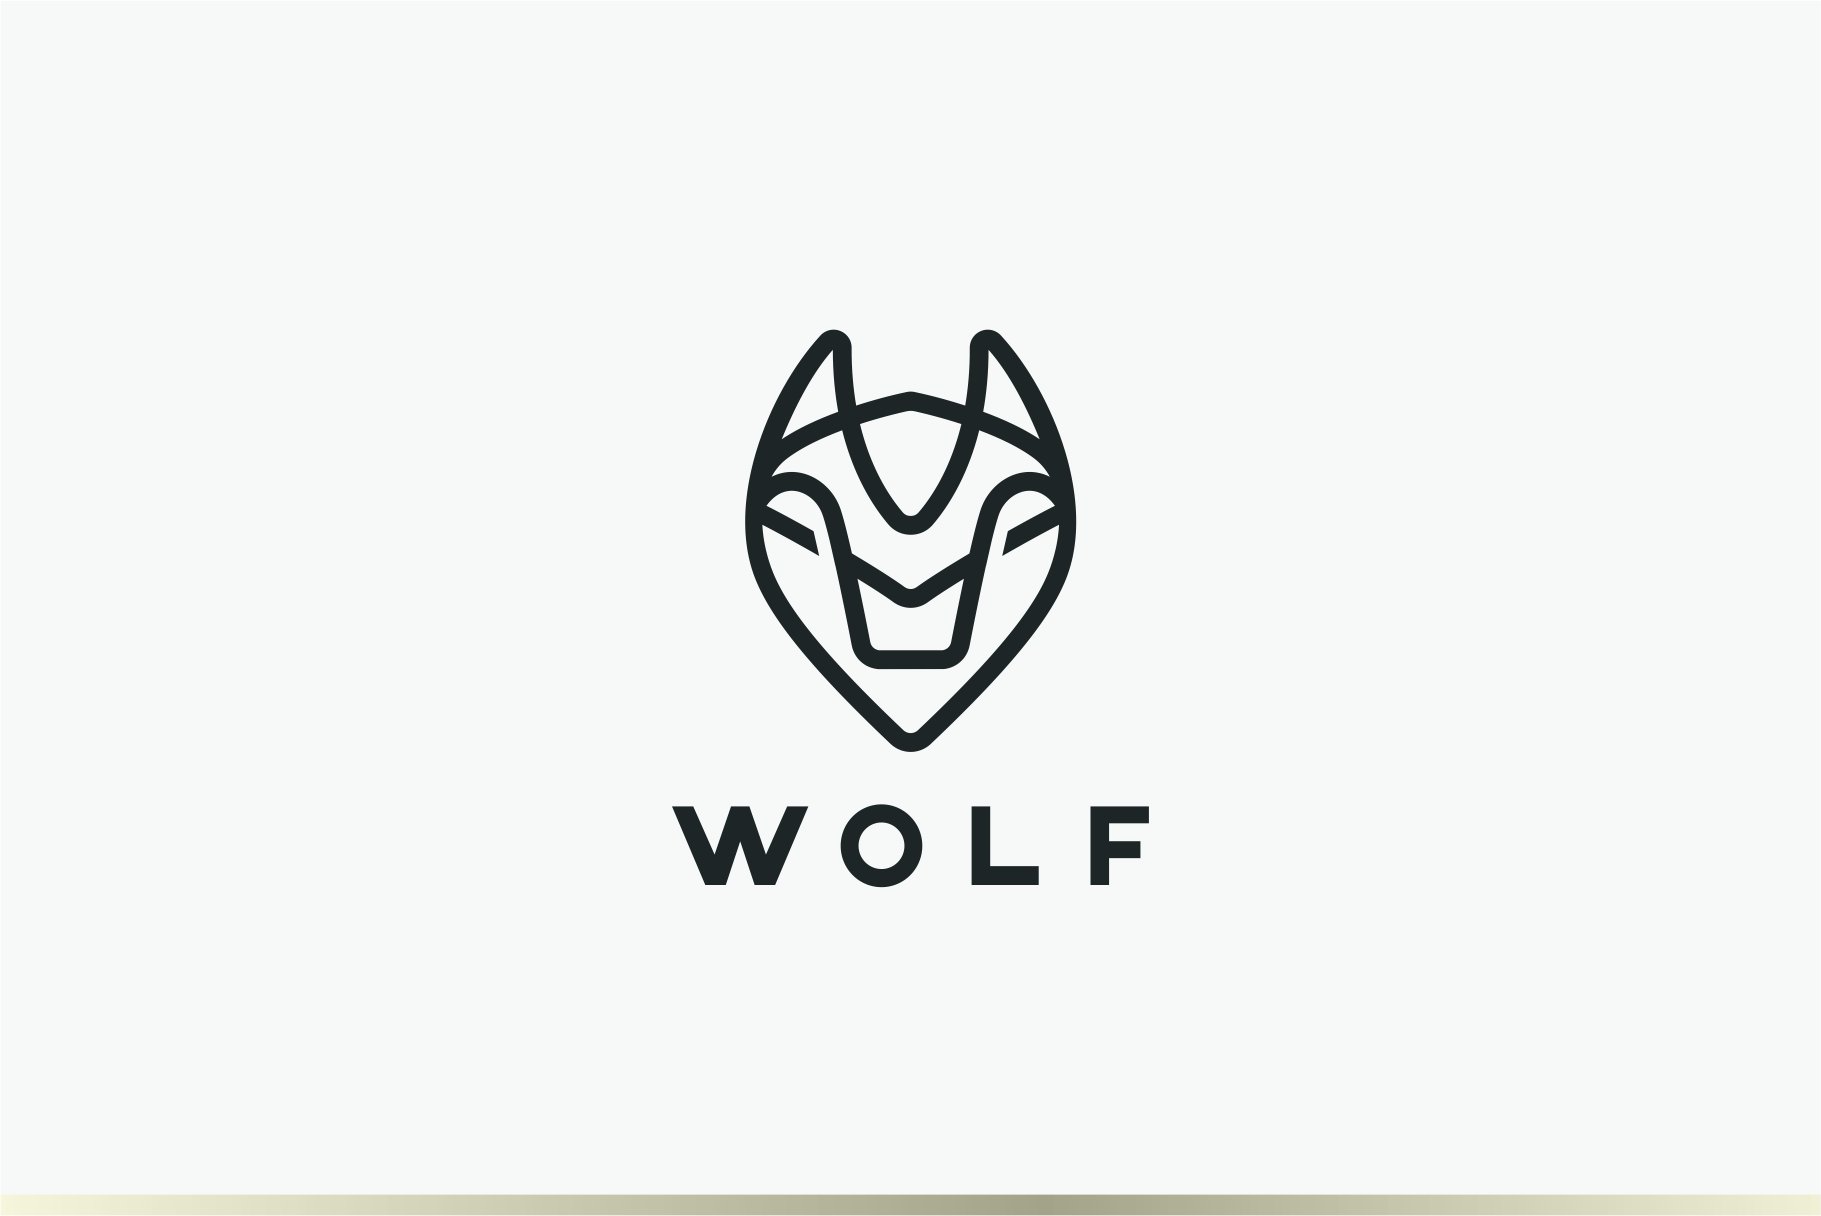 Wolf Head Logo cover image.